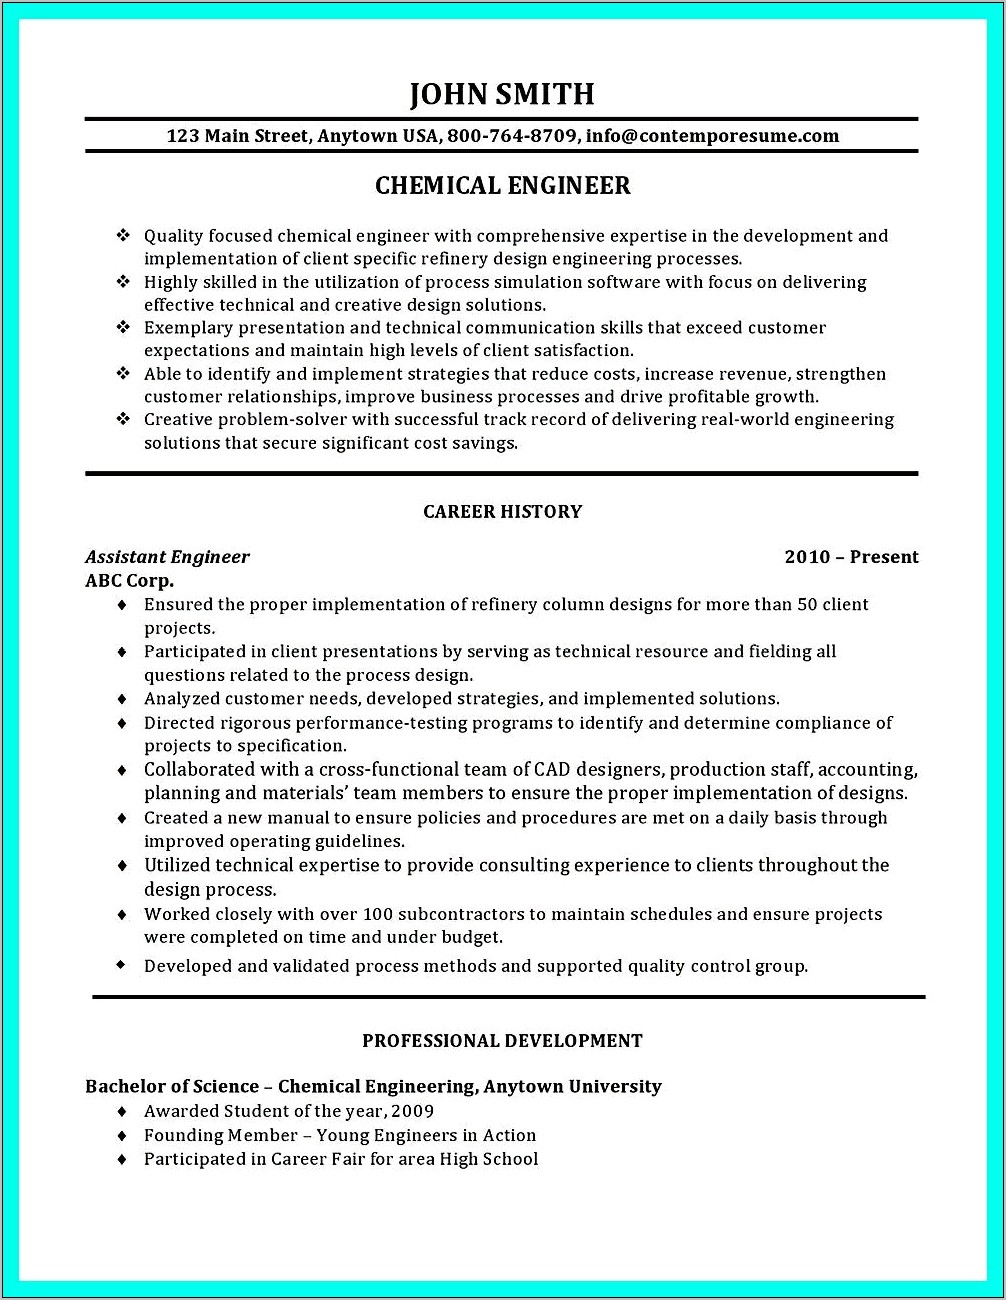 Cover Letter Resume Process Engineer For Fresh Graduate